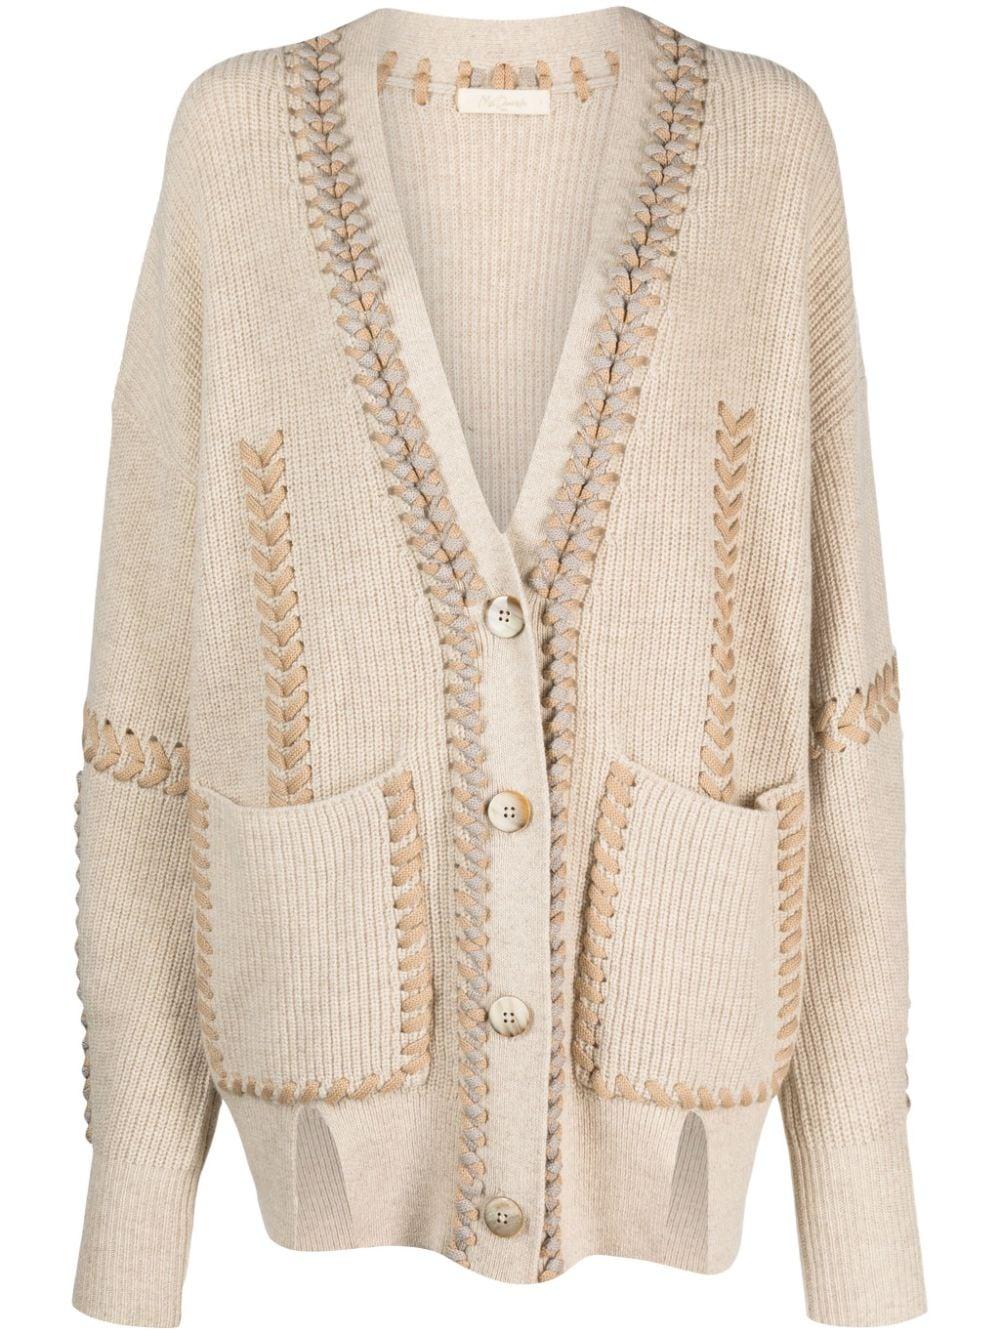 Mes Demoiselles Takashi Whipstitch Detailing Cardigan in Natural | Lyst